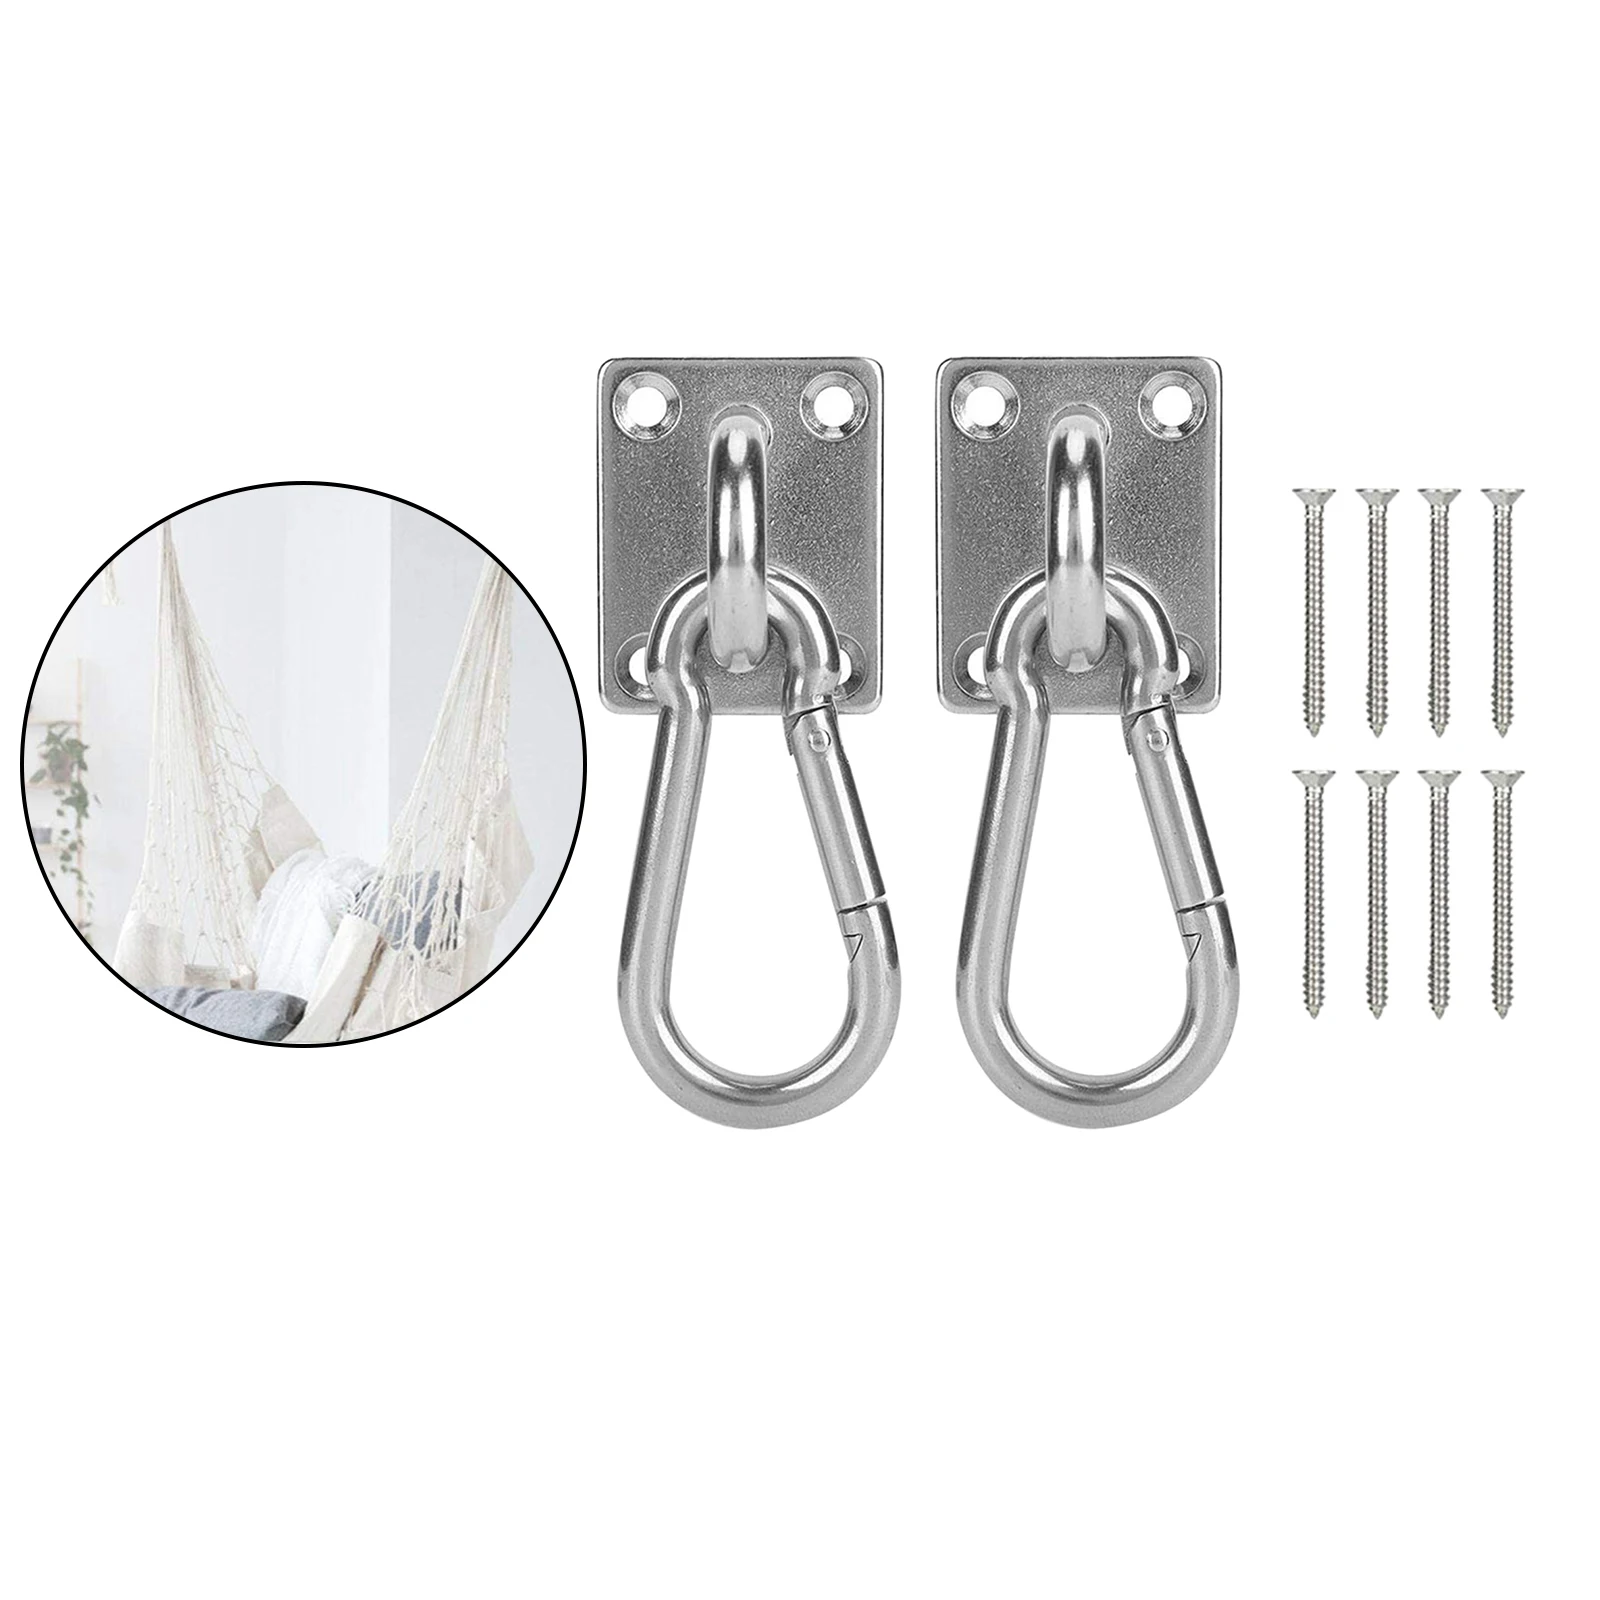 Ceiling Mount Anchor Hooks,  Trainer Wall Mounted  Strap Trainer er for Battle Rope,Yoga Swings,Hammock